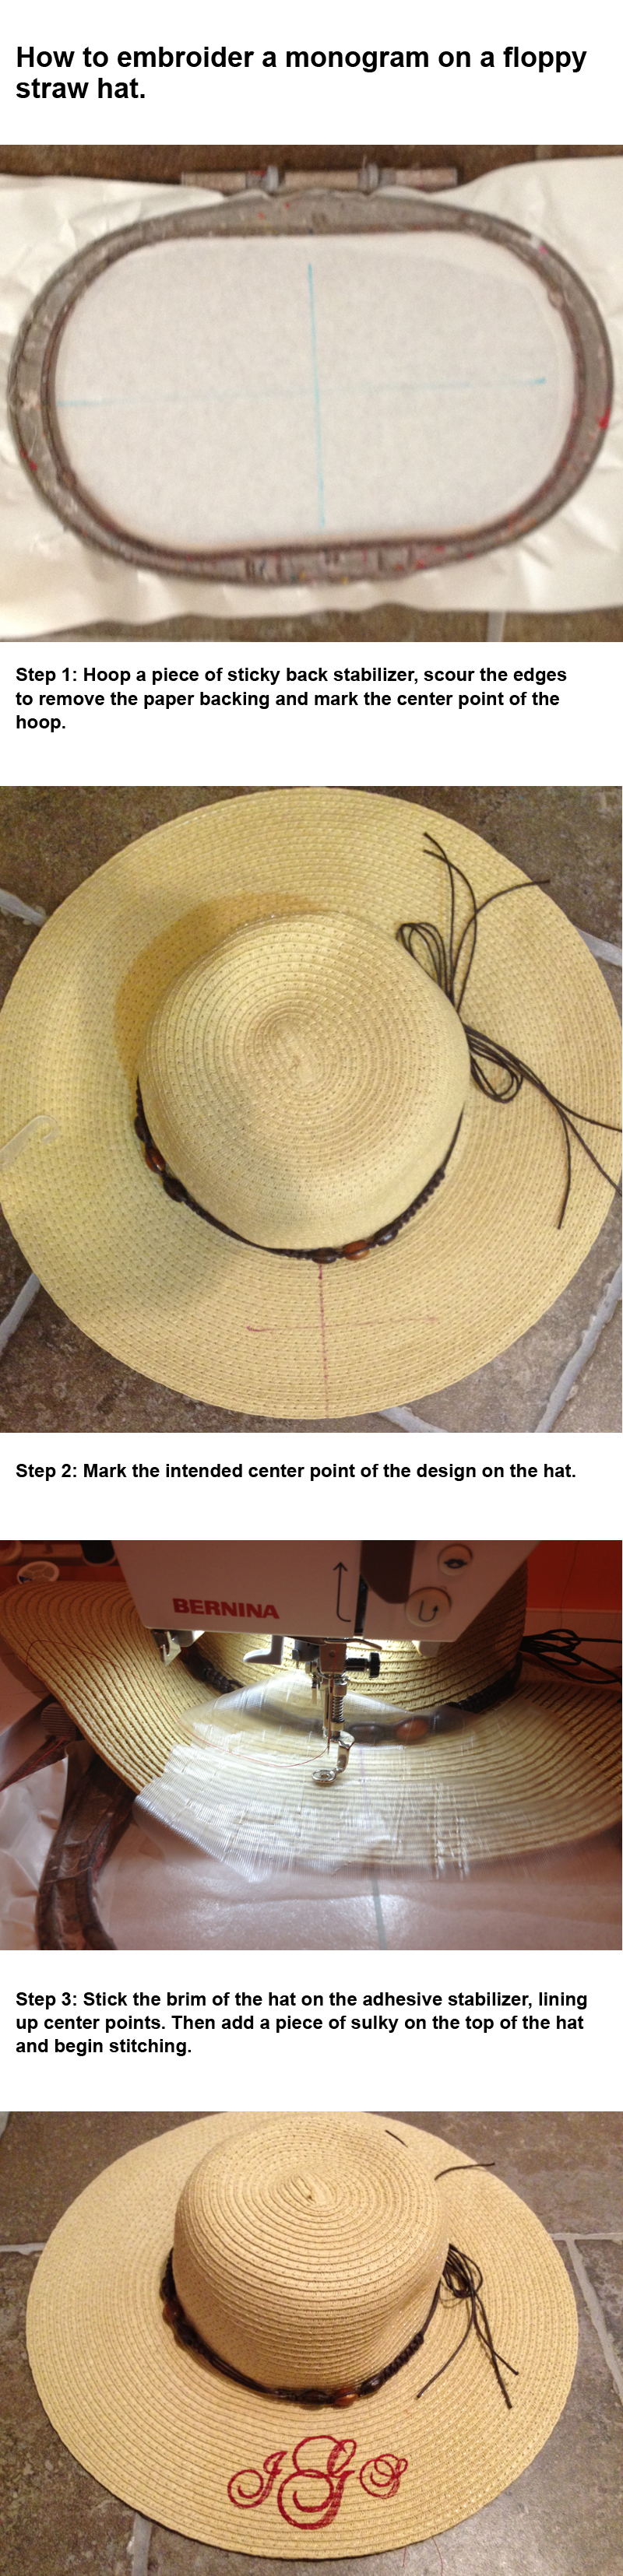 How to monogram a straw hat